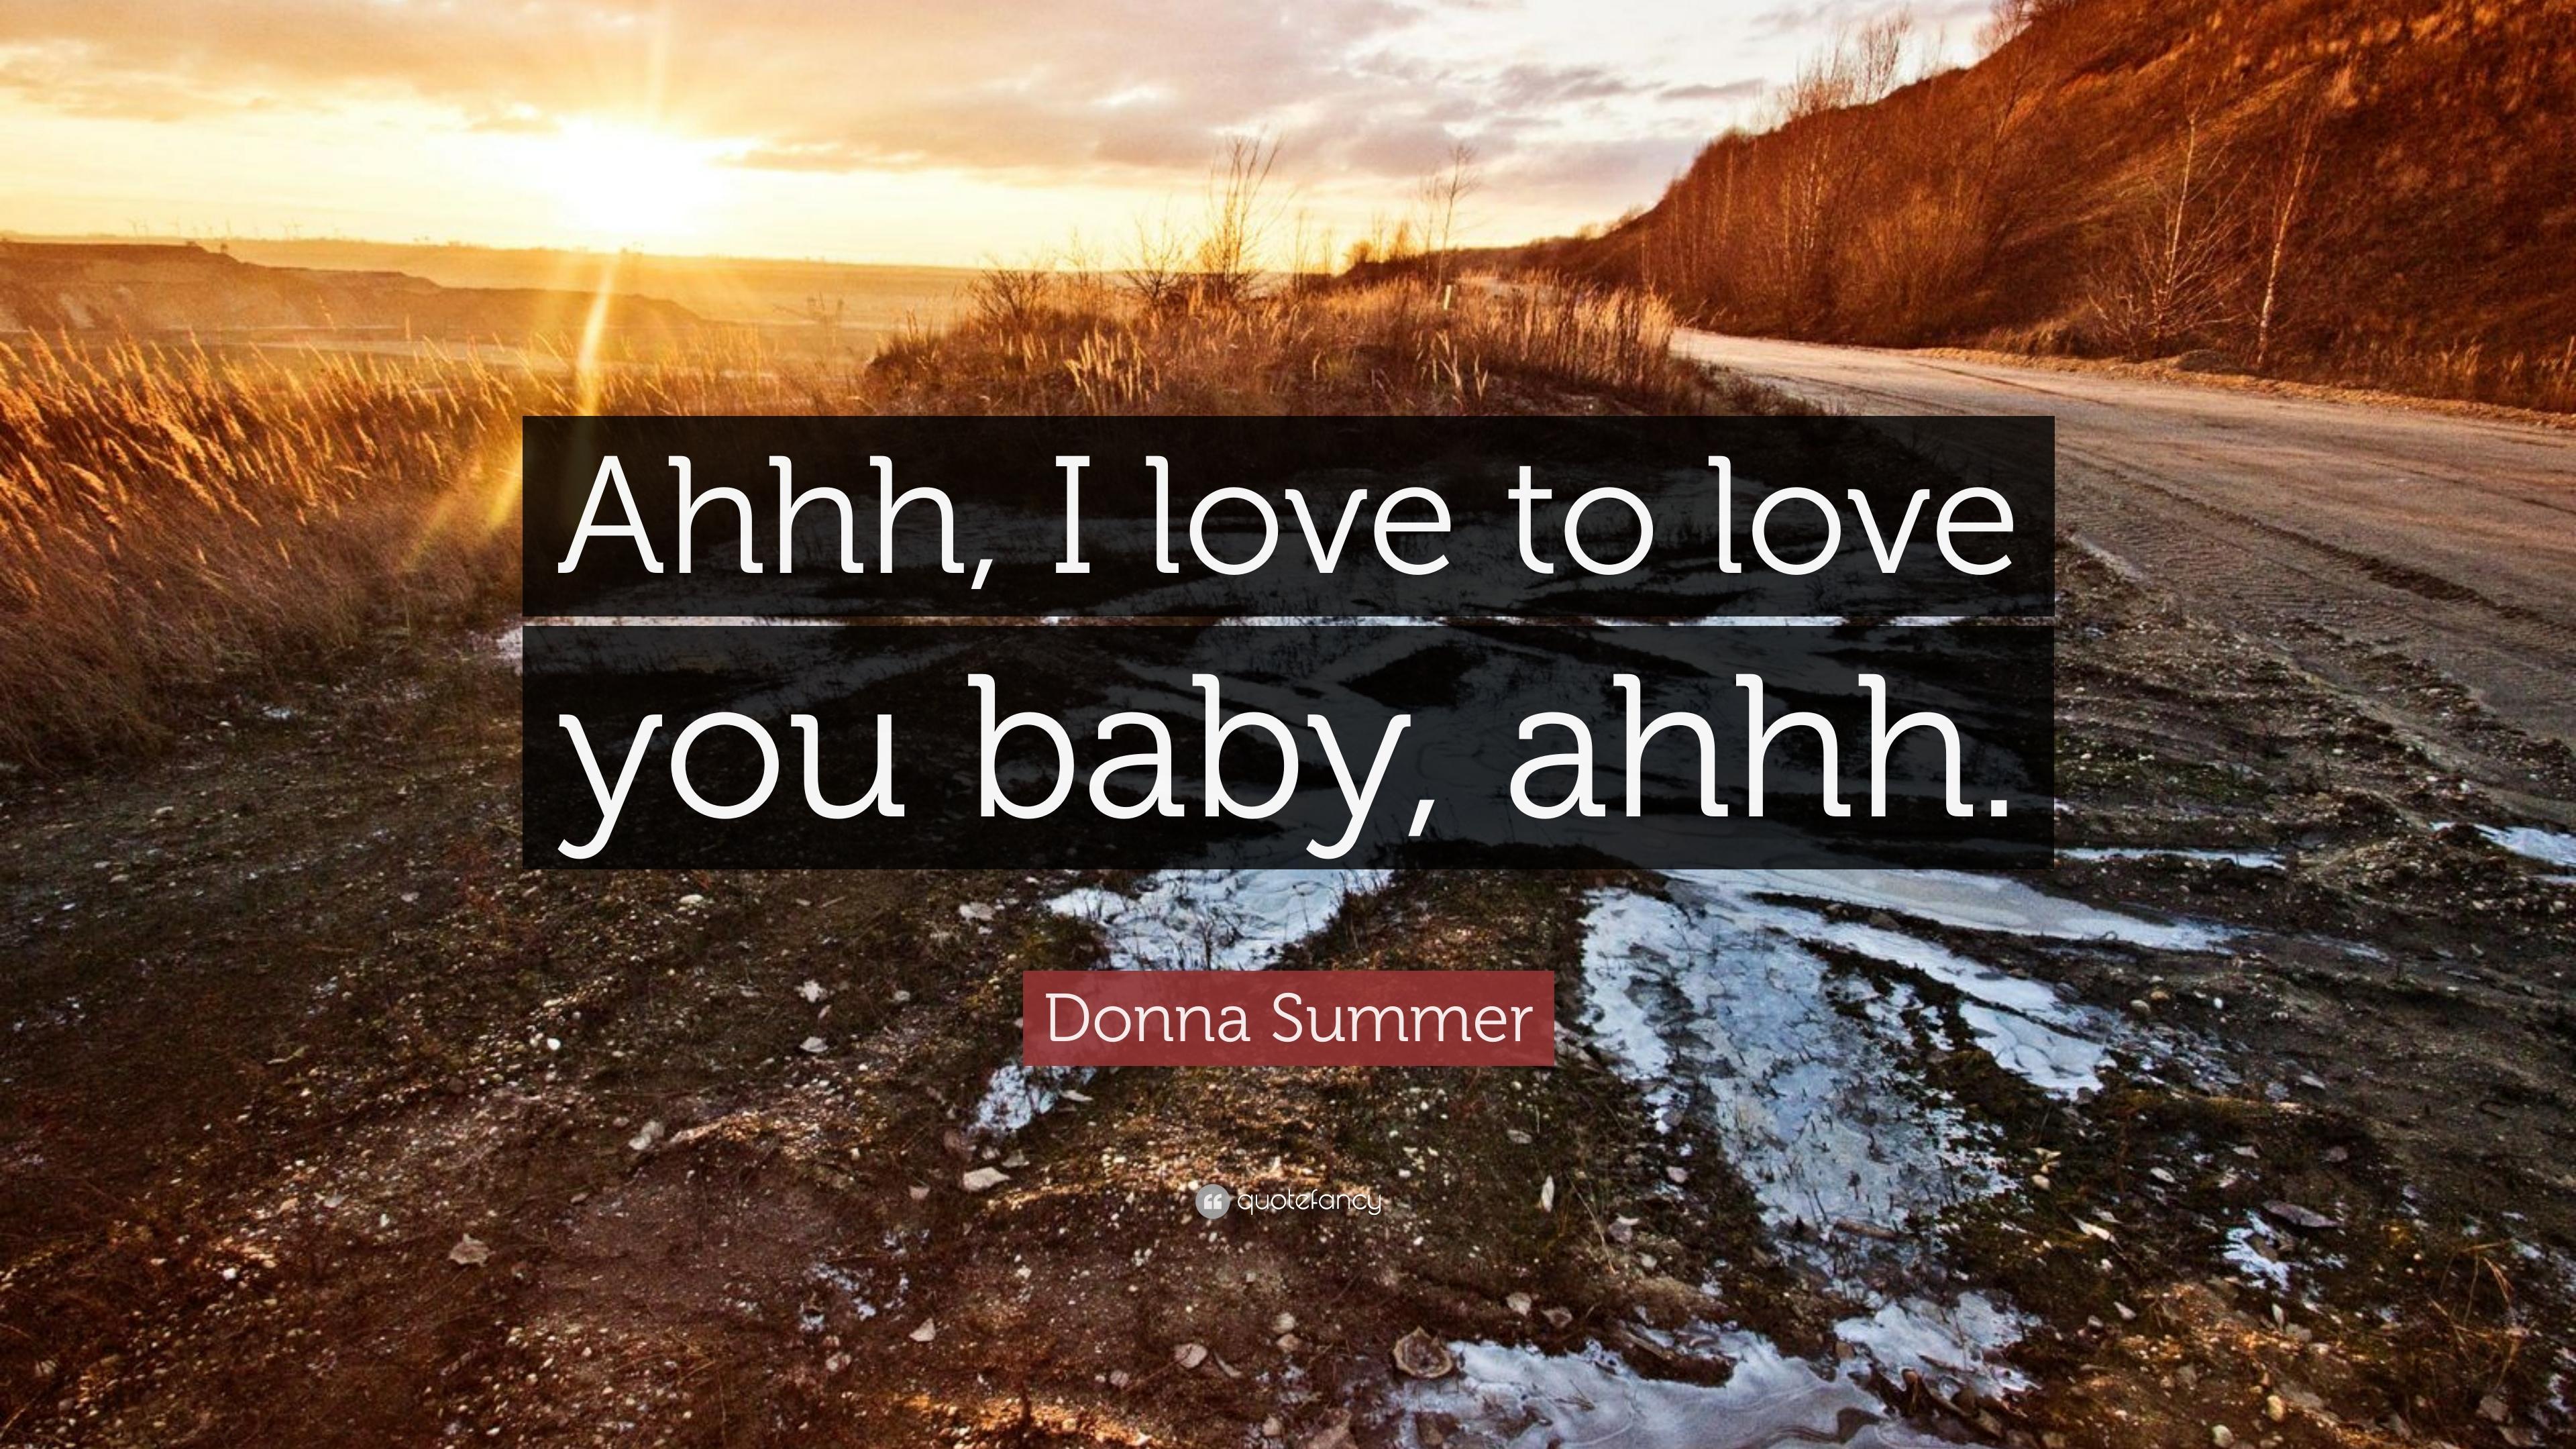 Donna Summer Quote: “Ahhh, I love to love you baby, ahhh.” 7